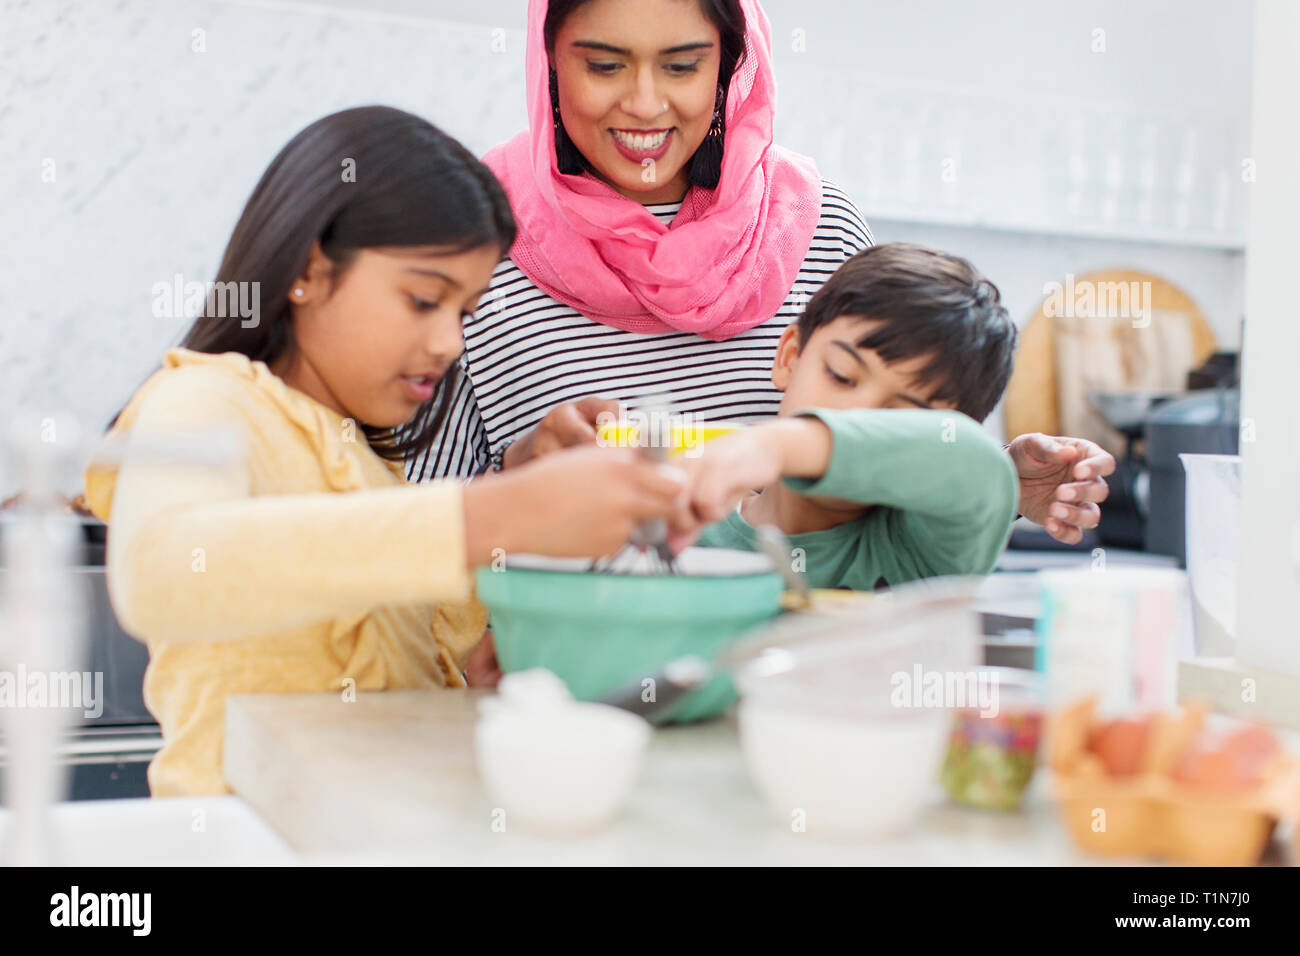 Mother in hijab baking with children in kitchen Stock Photo